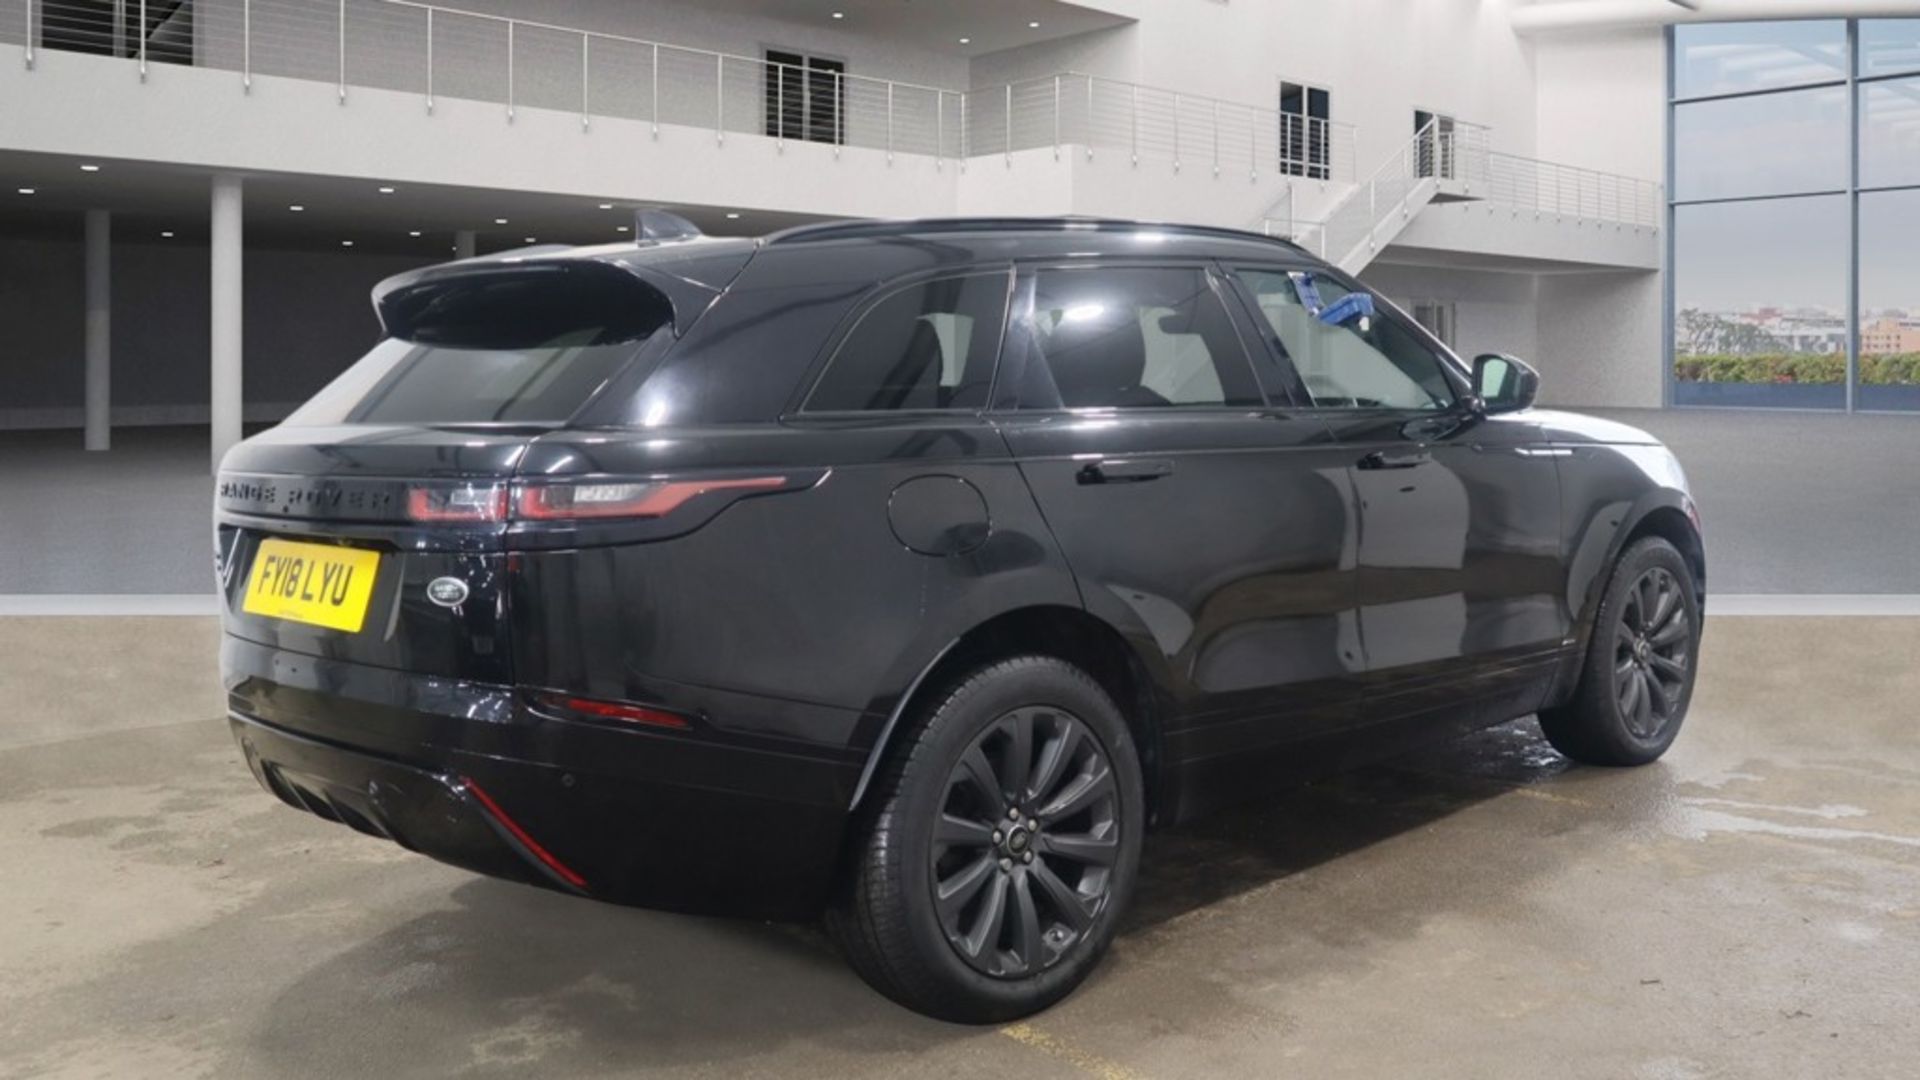 ** ON SALE ** Land Rover Range Rover Velar 2.0 D240 R-Dynamic S 2018 '18 Reg' 4WD - Panoramic Roof - Image 3 of 9